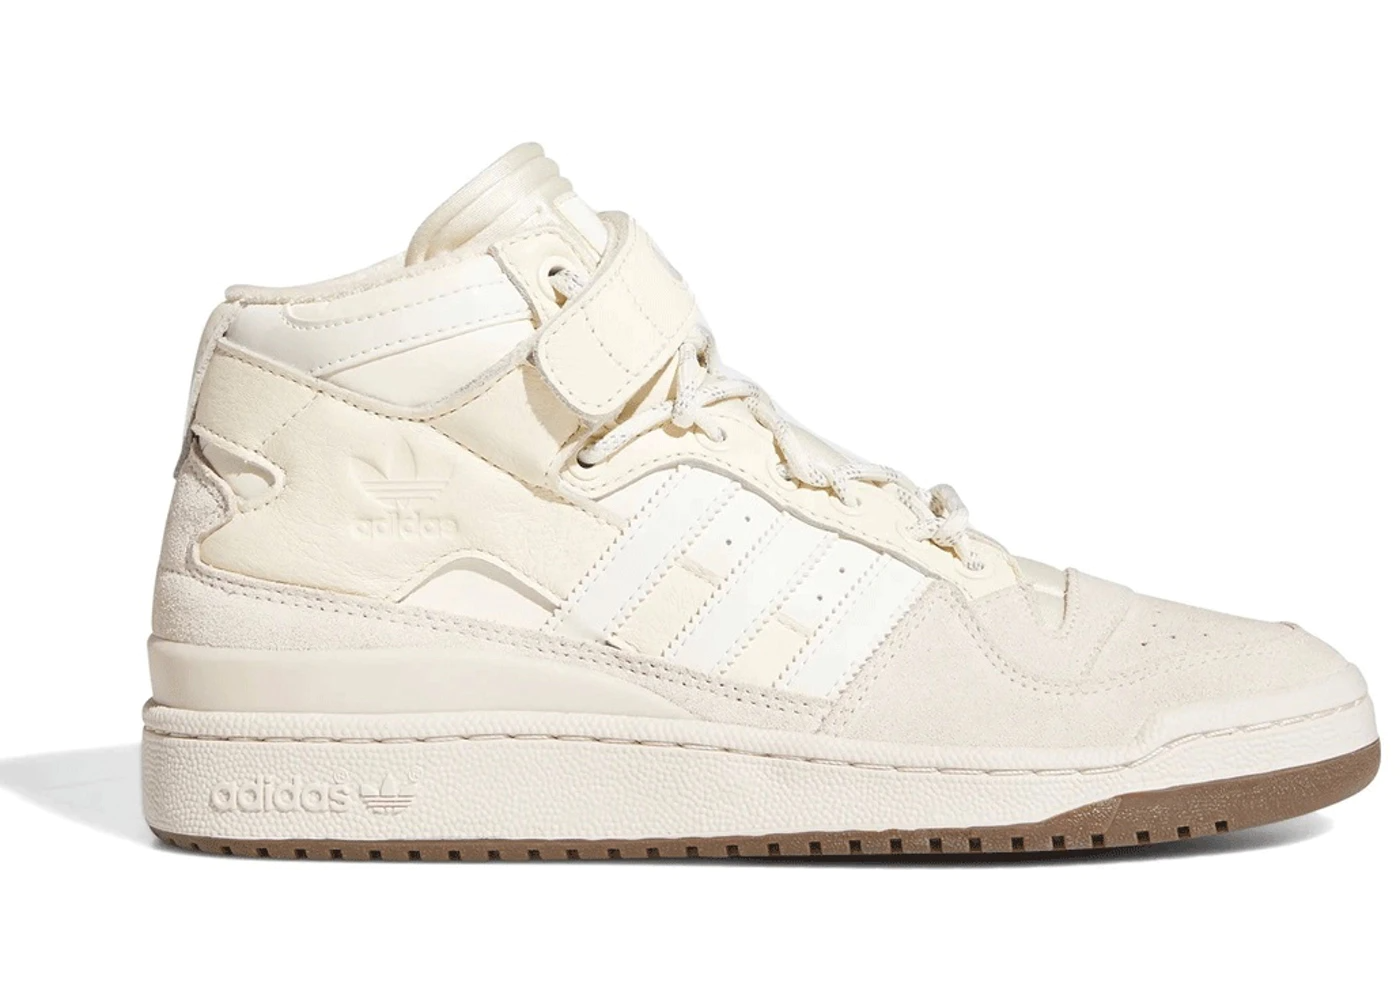 Now Available: Ivy Park x adidas Forum Mid II 